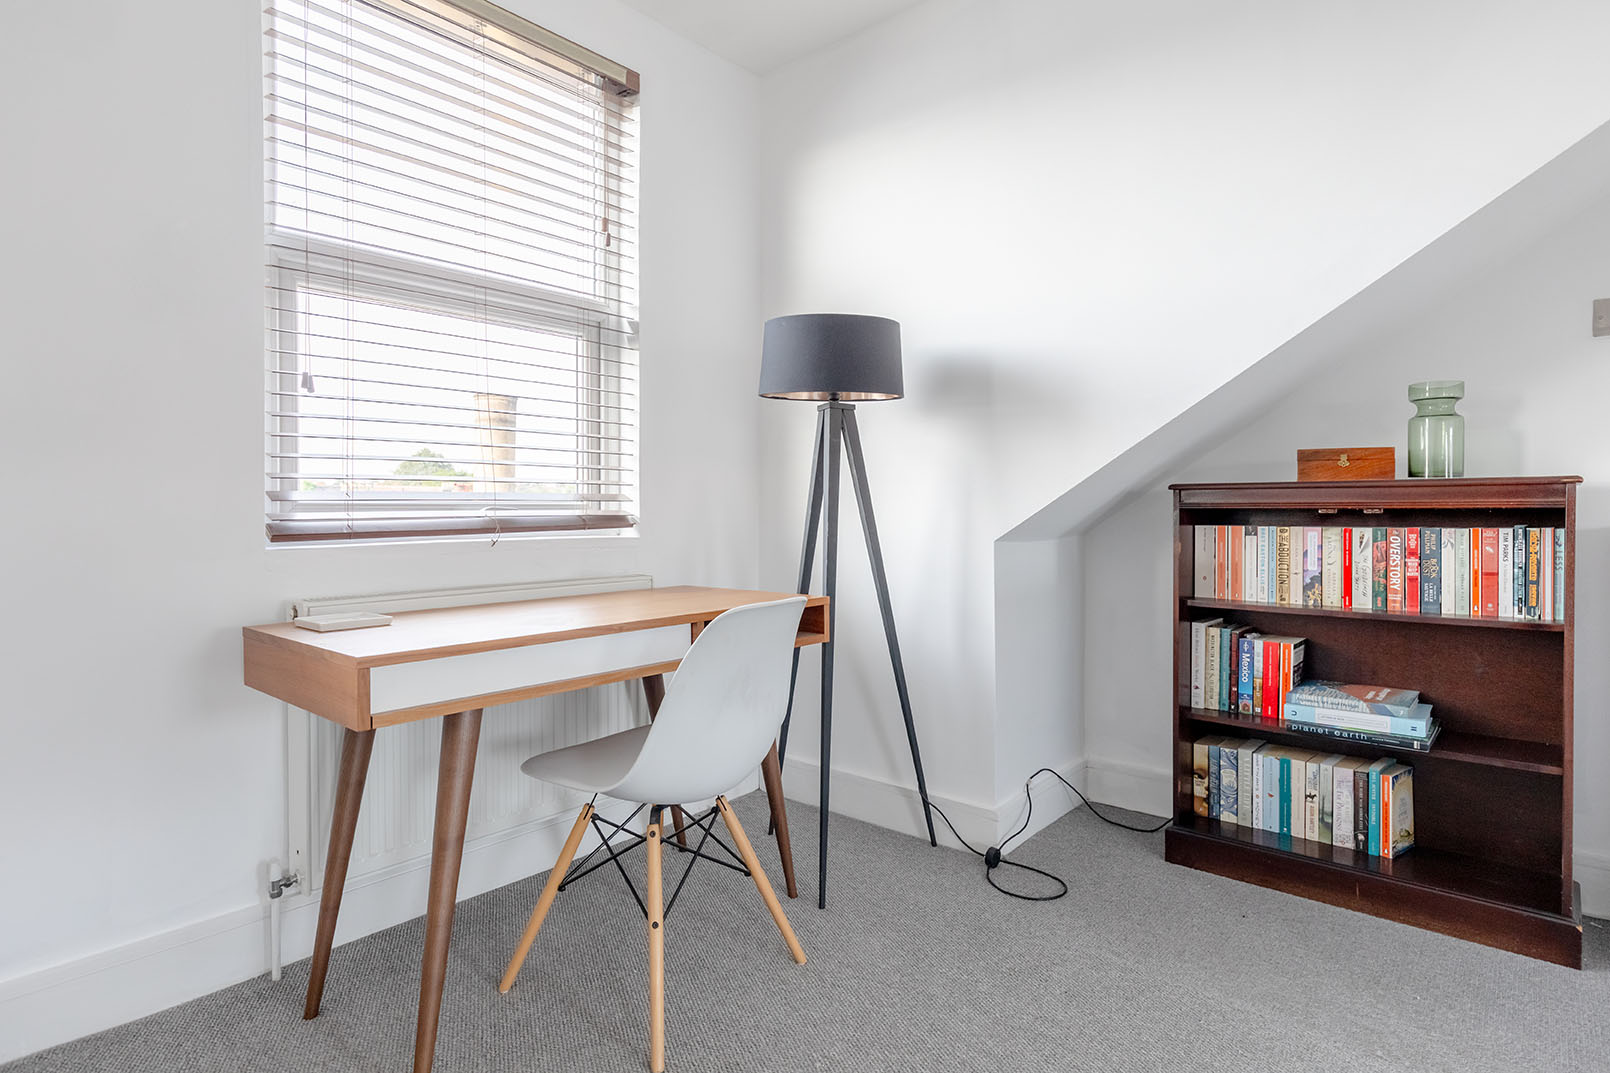 A bright, modern design study space in an attic room with a bookshelf, clean and neat room.